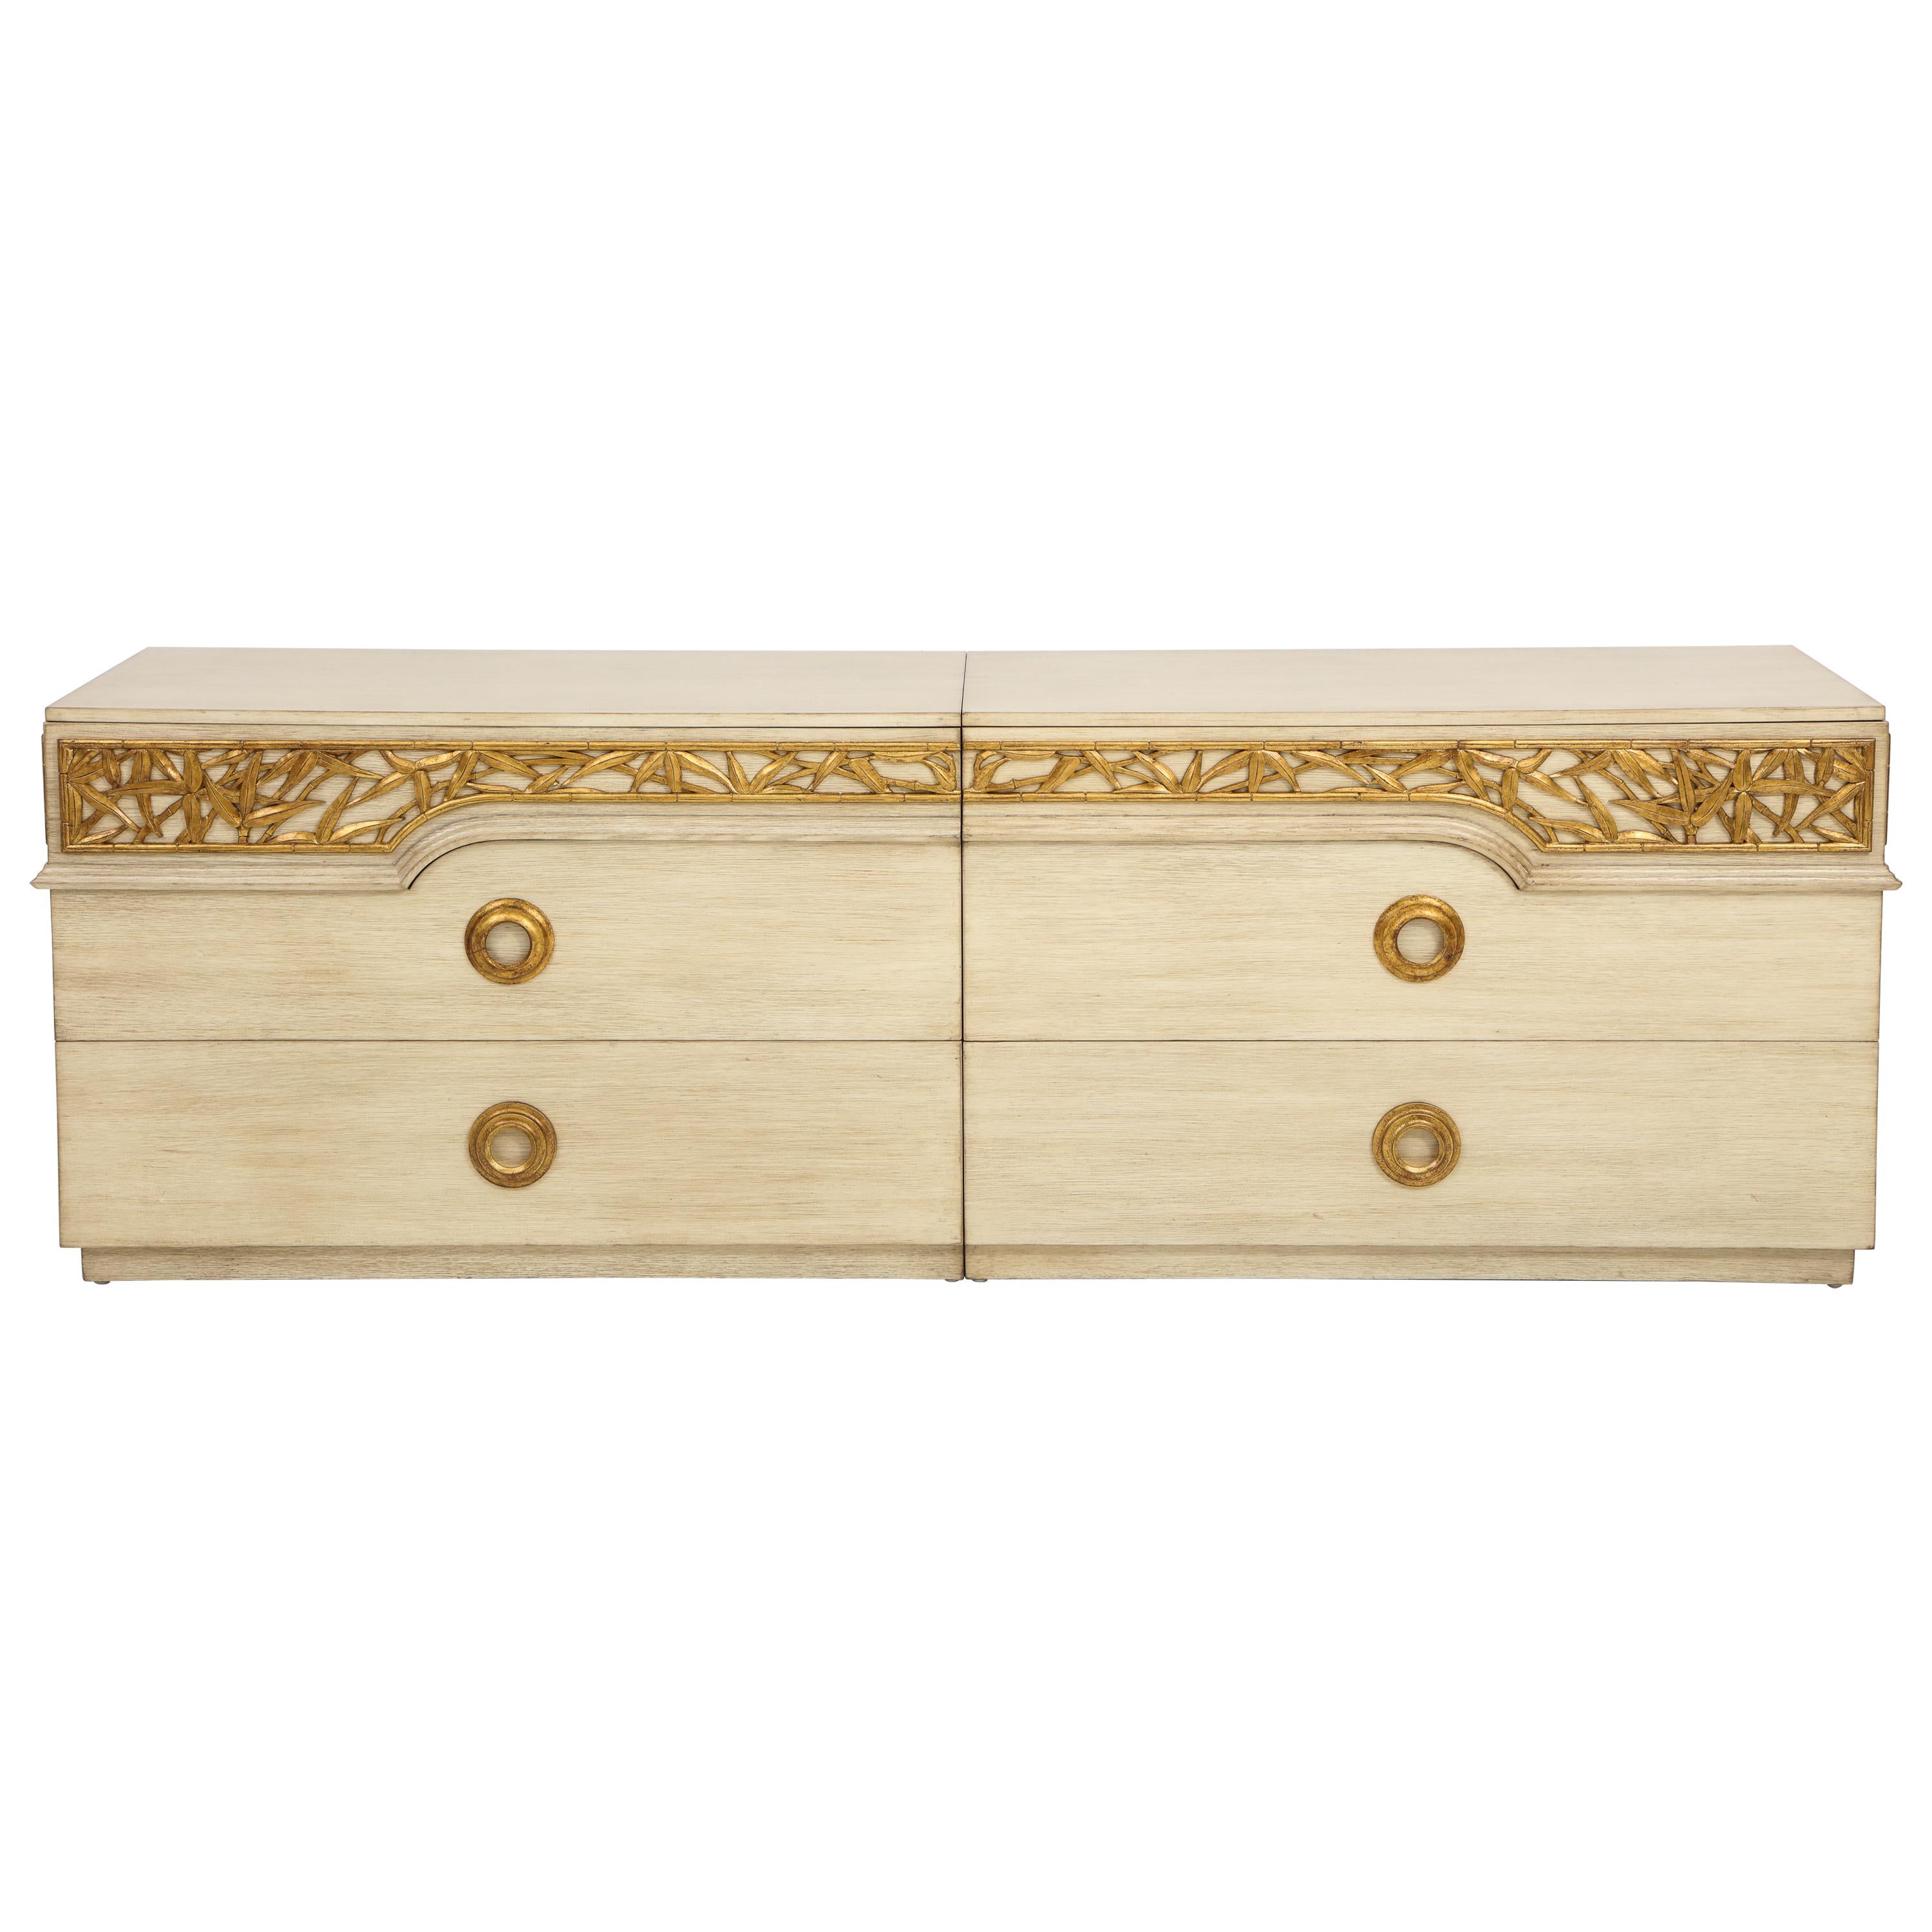 Large Bamboo Dresser by James Mont For Sale